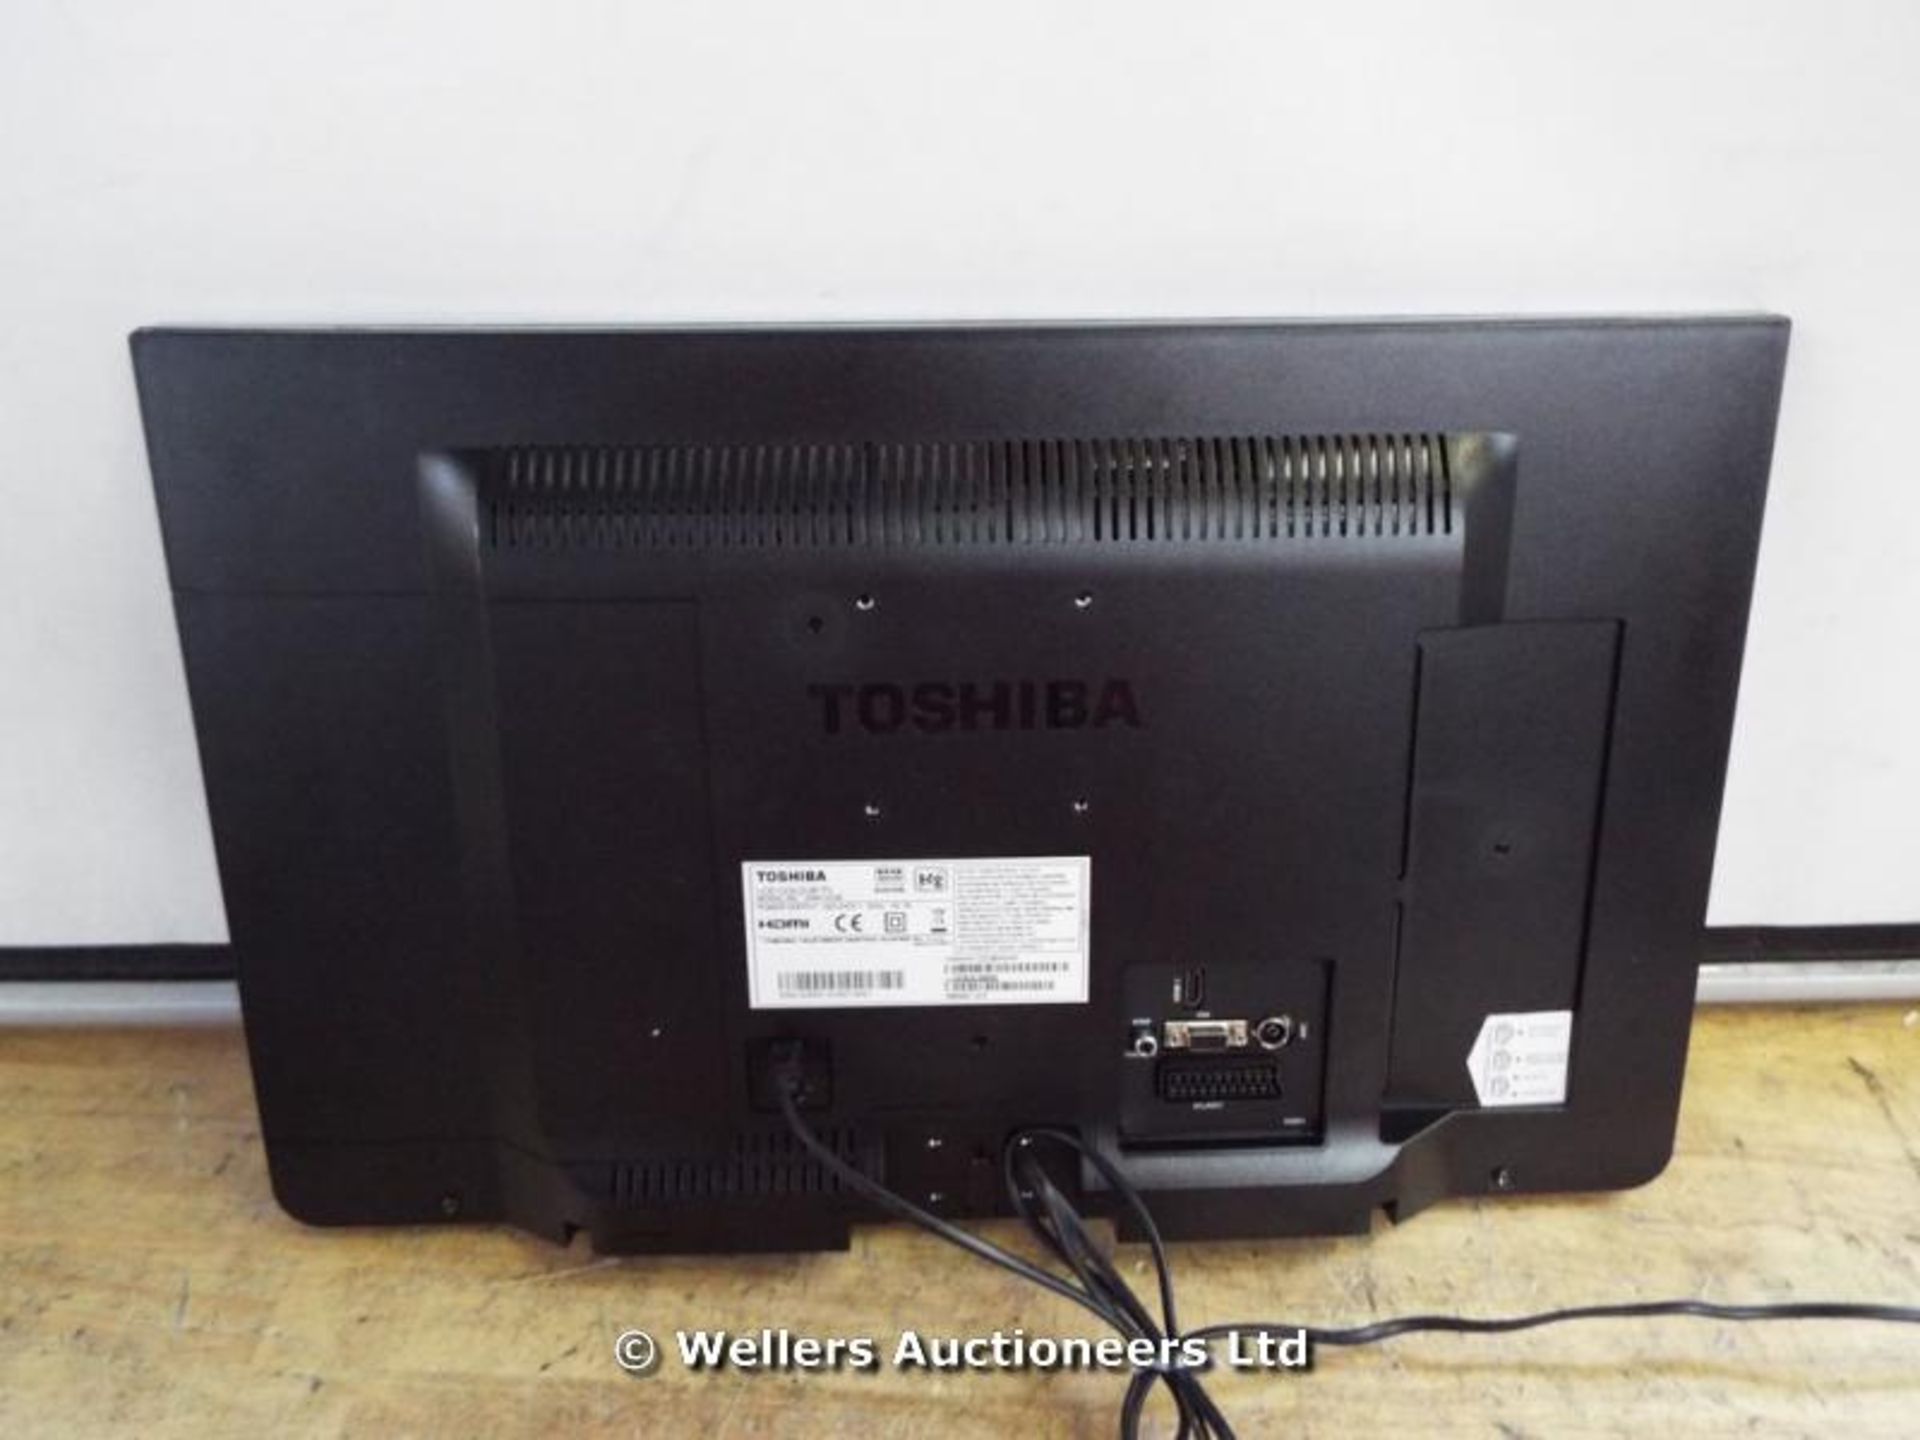 *"TOSHIBA 24W1333B 24" HD LED TV / POWER / PICTURE / NO REMOTE / WITH STAND / ORIGINAL BOX (4054902) - Image 2 of 3